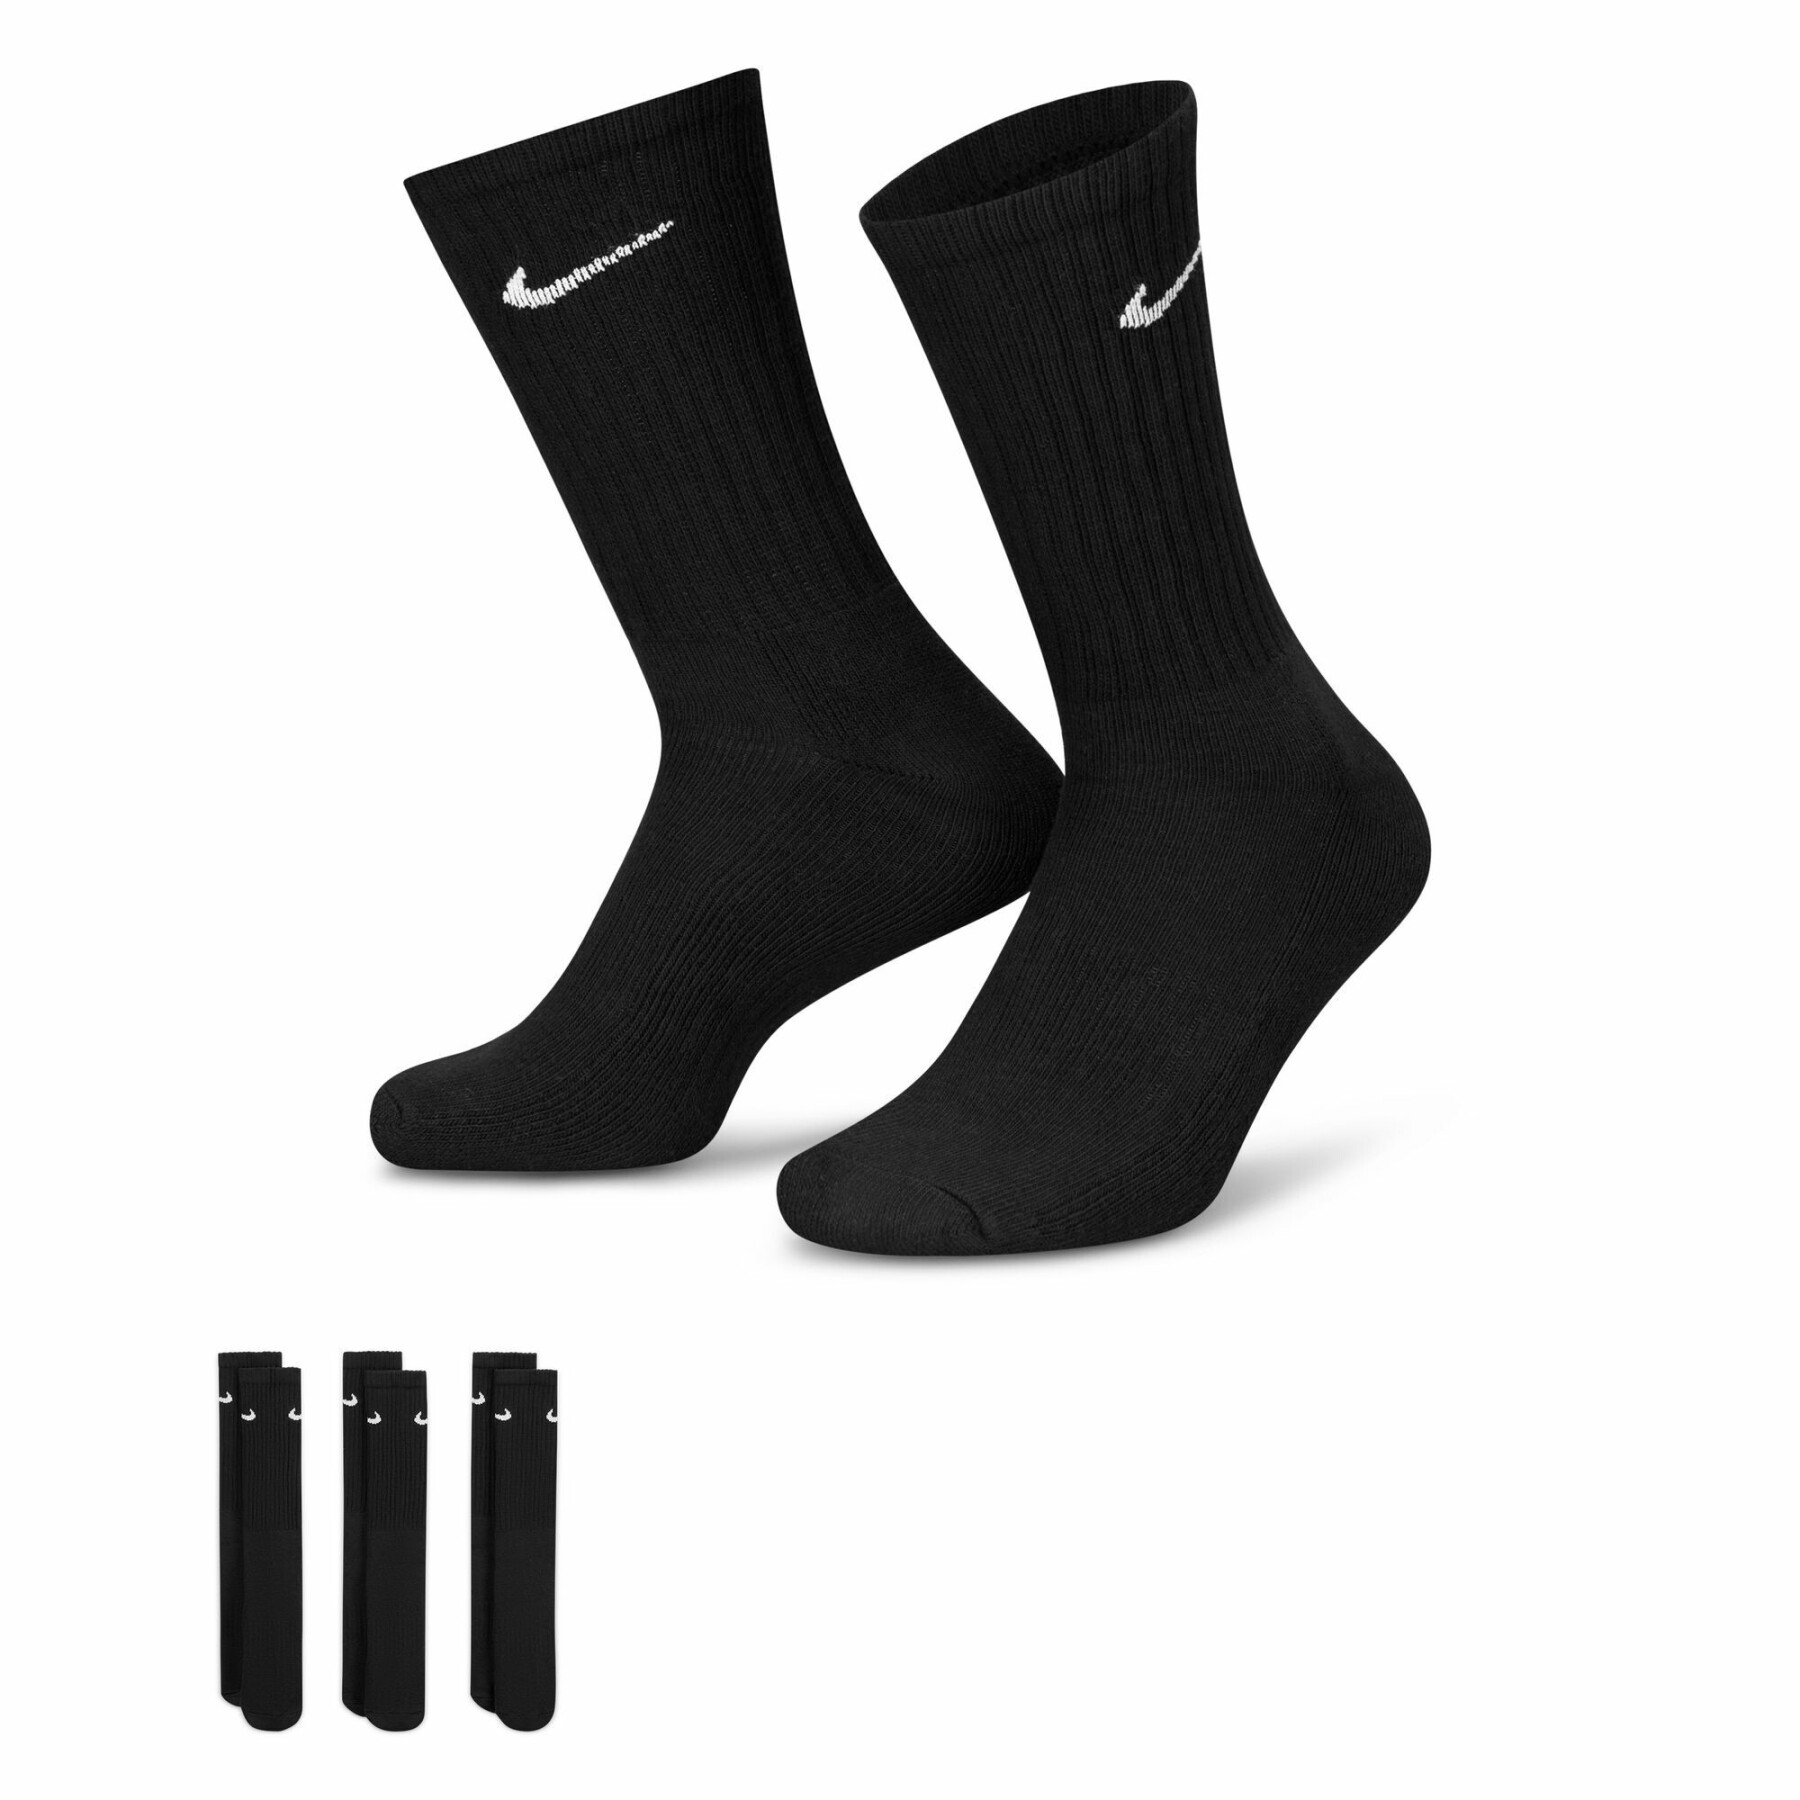 Chaussettes Nike Cushioned (x6)